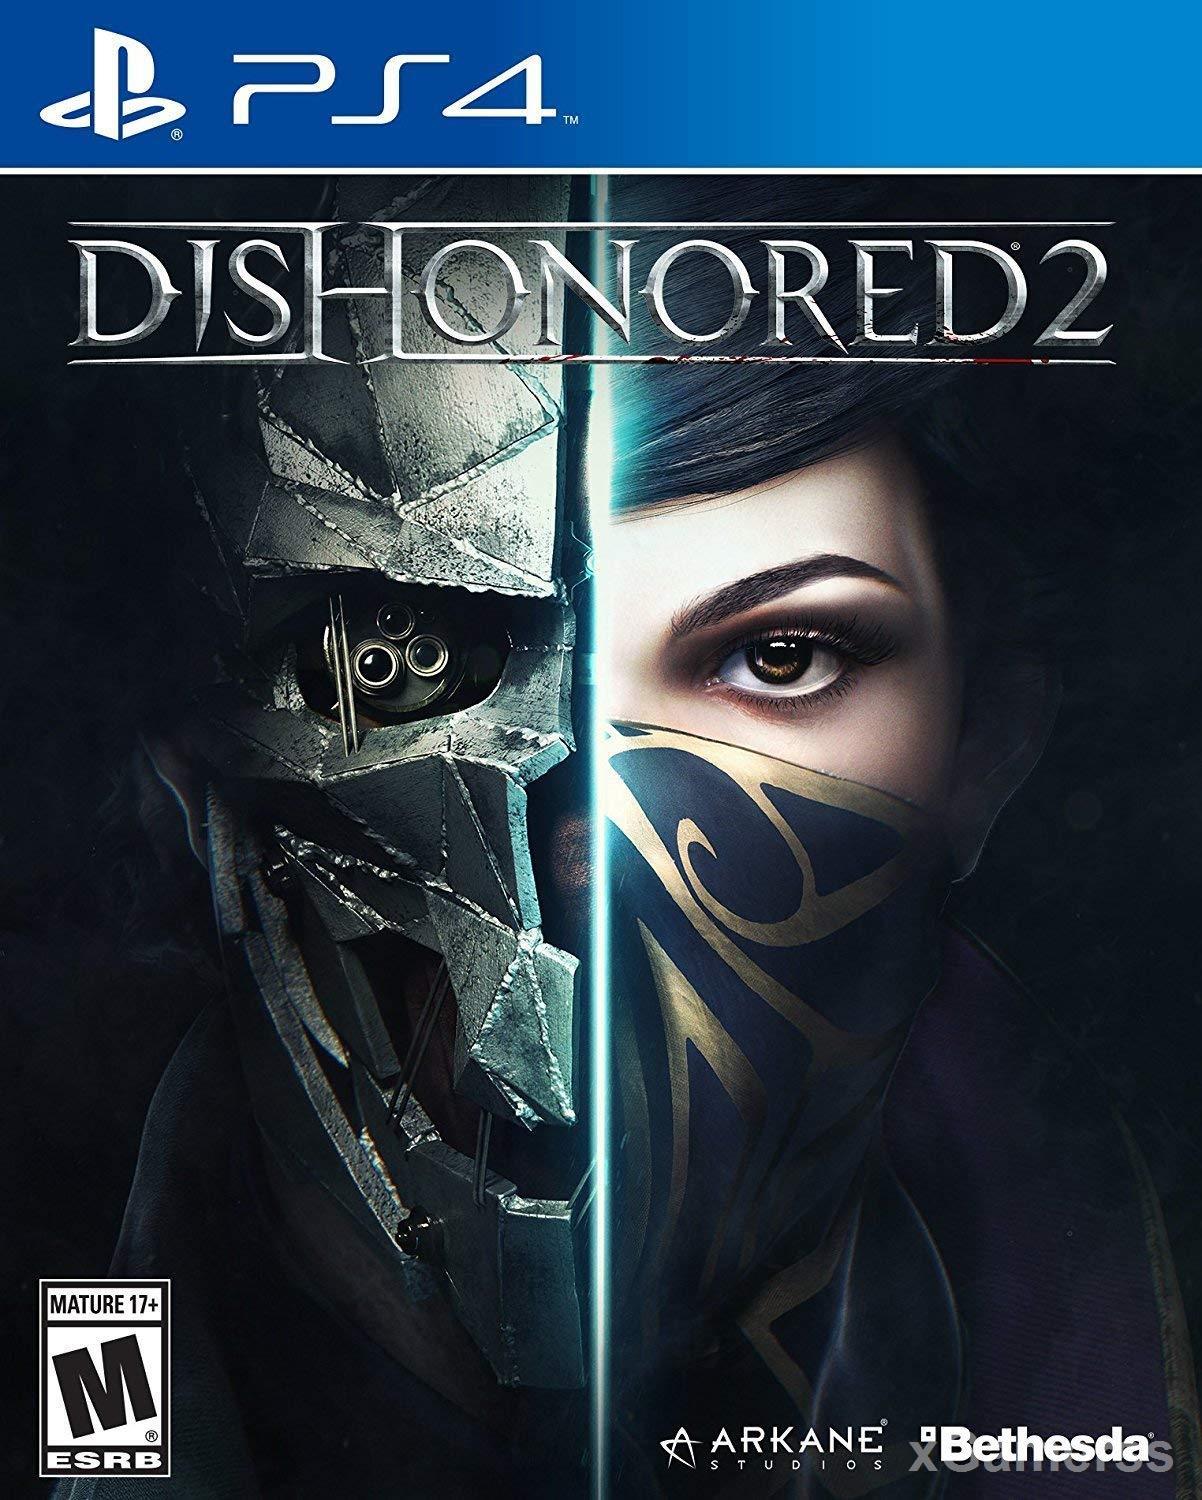 Dishonored 2 - the sequel to the original title Dishonored